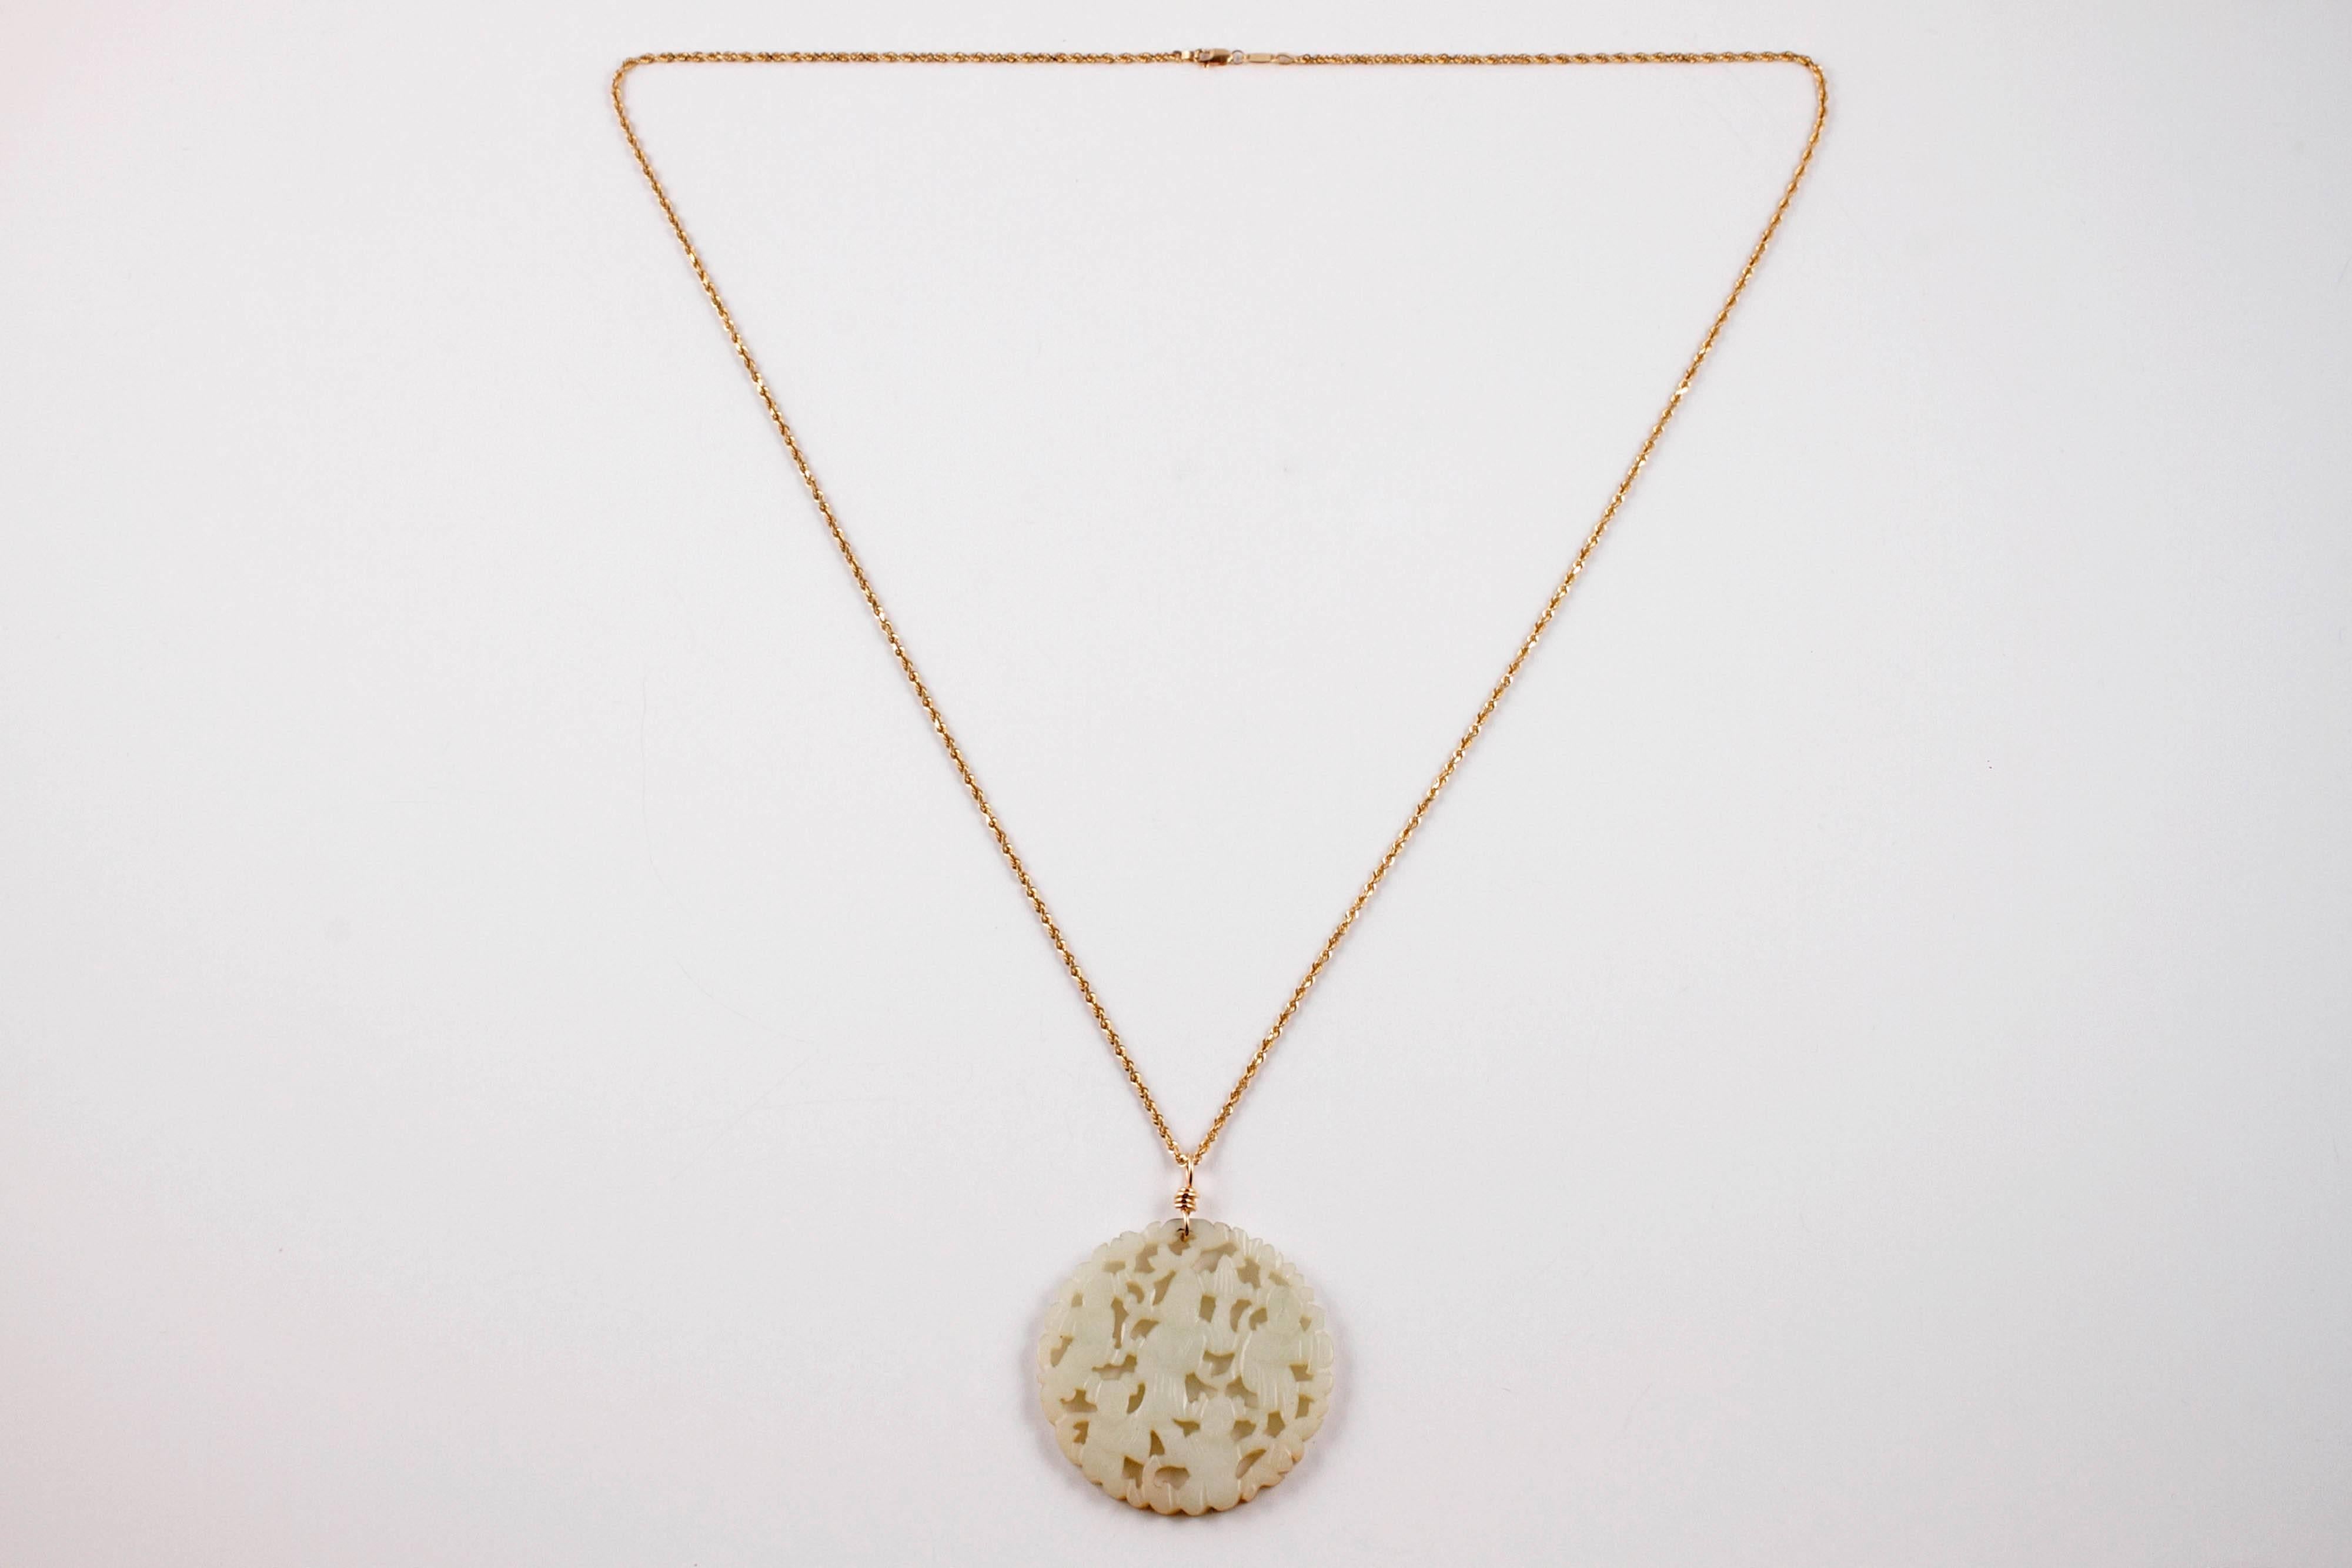 Intricately carved nephrite jade pendant on a 30 inch 14 karat gold chain.